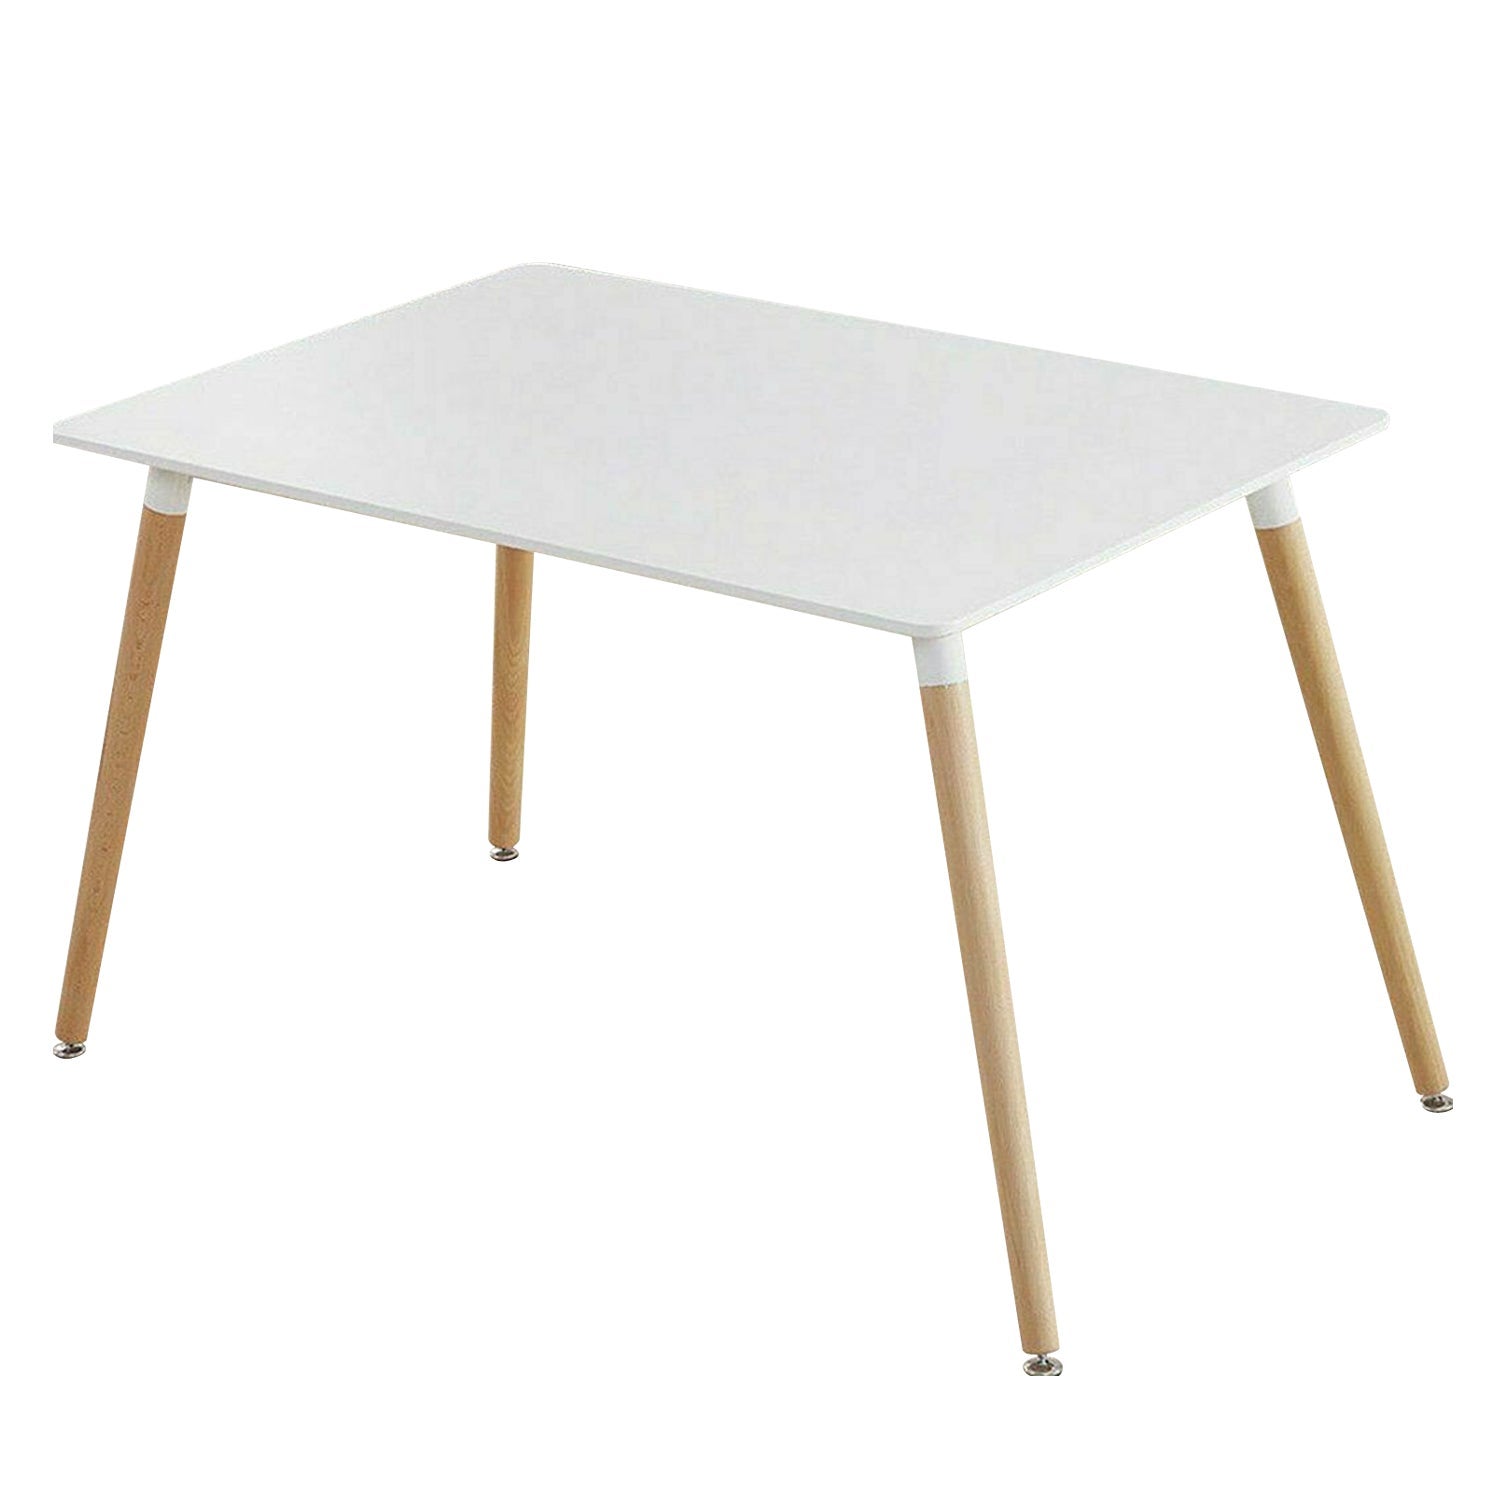 Cafe Wooden Top Replica Tables Modern Pop Hot Square Dining Table White